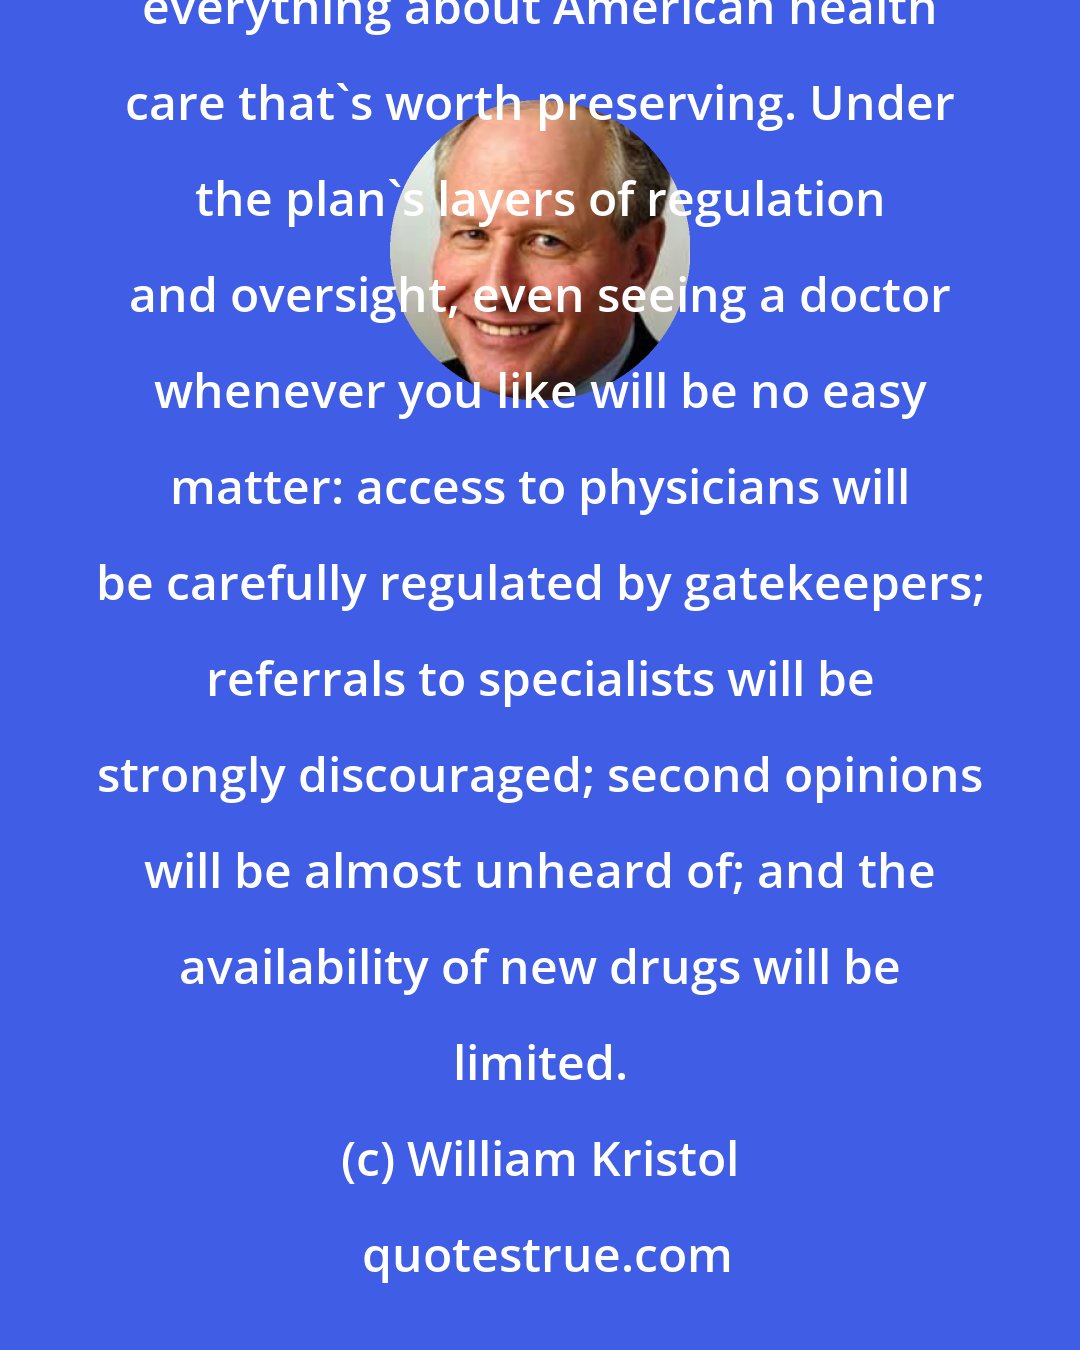 William Kristol: The most devastating indictment of the president's proposal is that it threatens to destroy virtually everything about American health care that's worth preserving. Under the plan's layers of regulation and oversight, even seeing a doctor whenever you like will be no easy matter: access to physicians will be carefully regulated by gatekeepers; referrals to specialists will be strongly discouraged; second opinions will be almost unheard of; and the availability of new drugs will be limited.